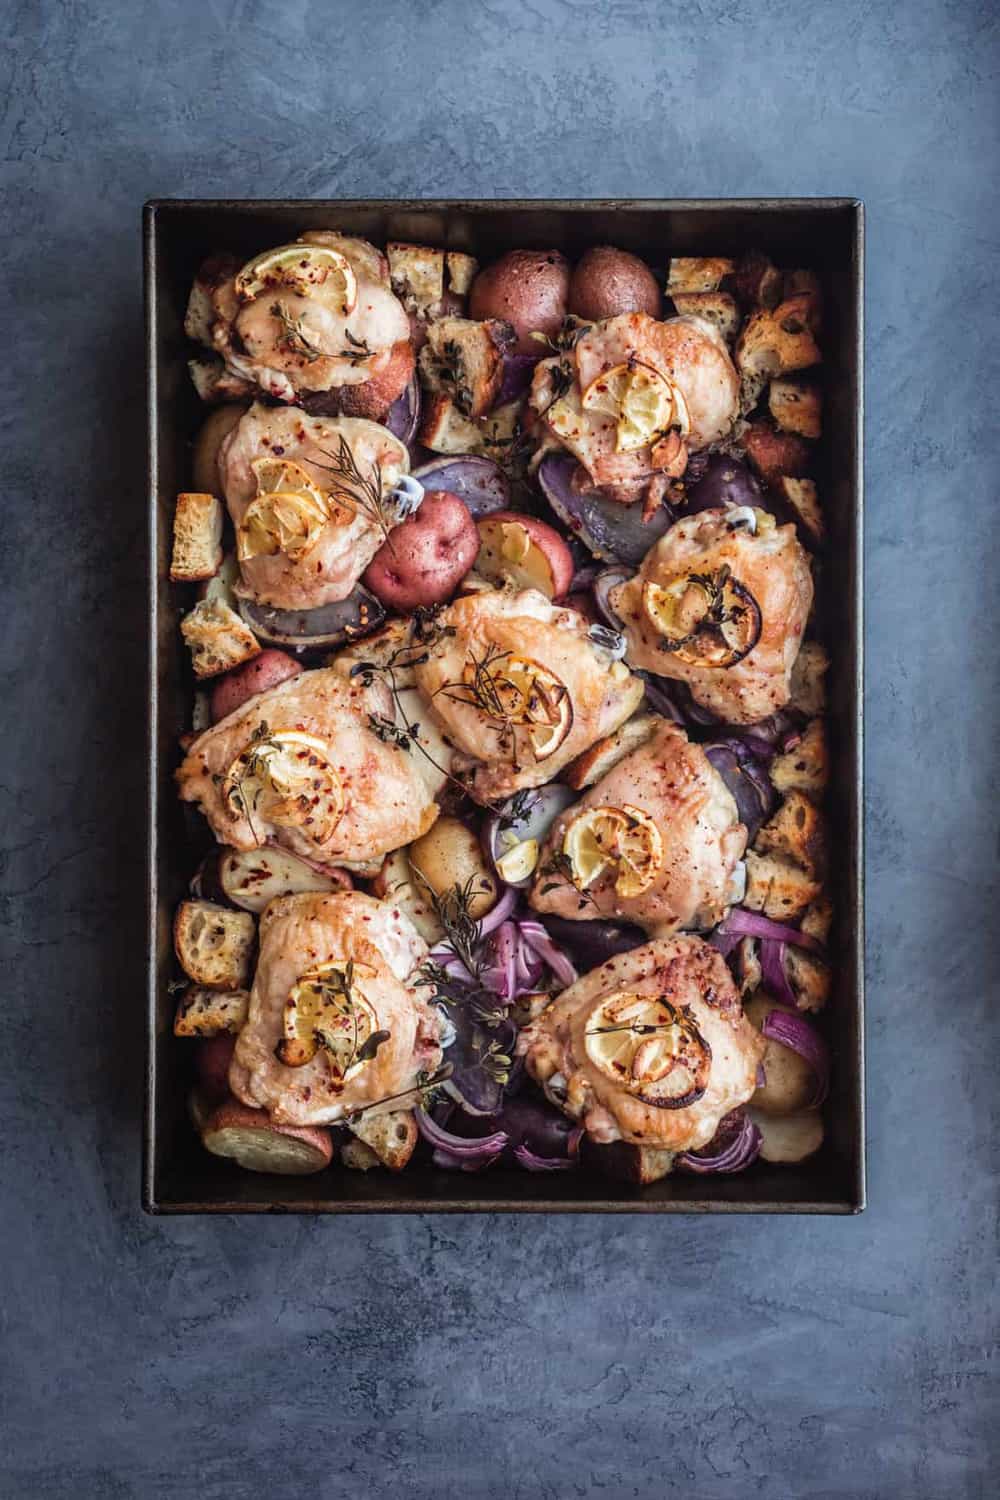 Sheet Pan with Chicken & Potatoes in baking tray, post oven.